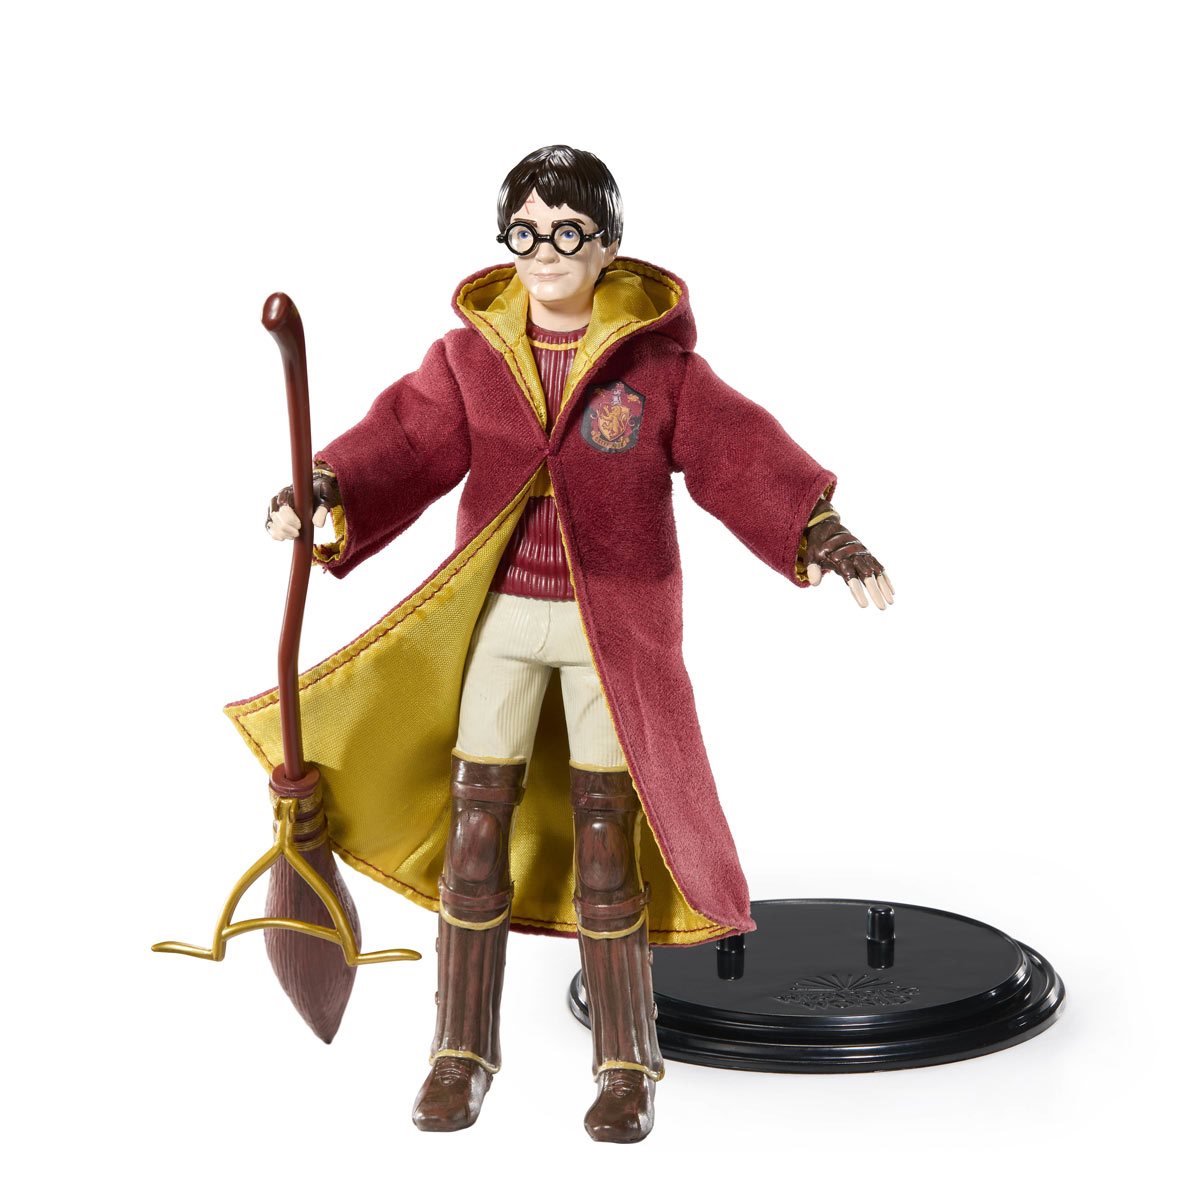  BendyFigs Harry Potter Dobby : Toys & Games